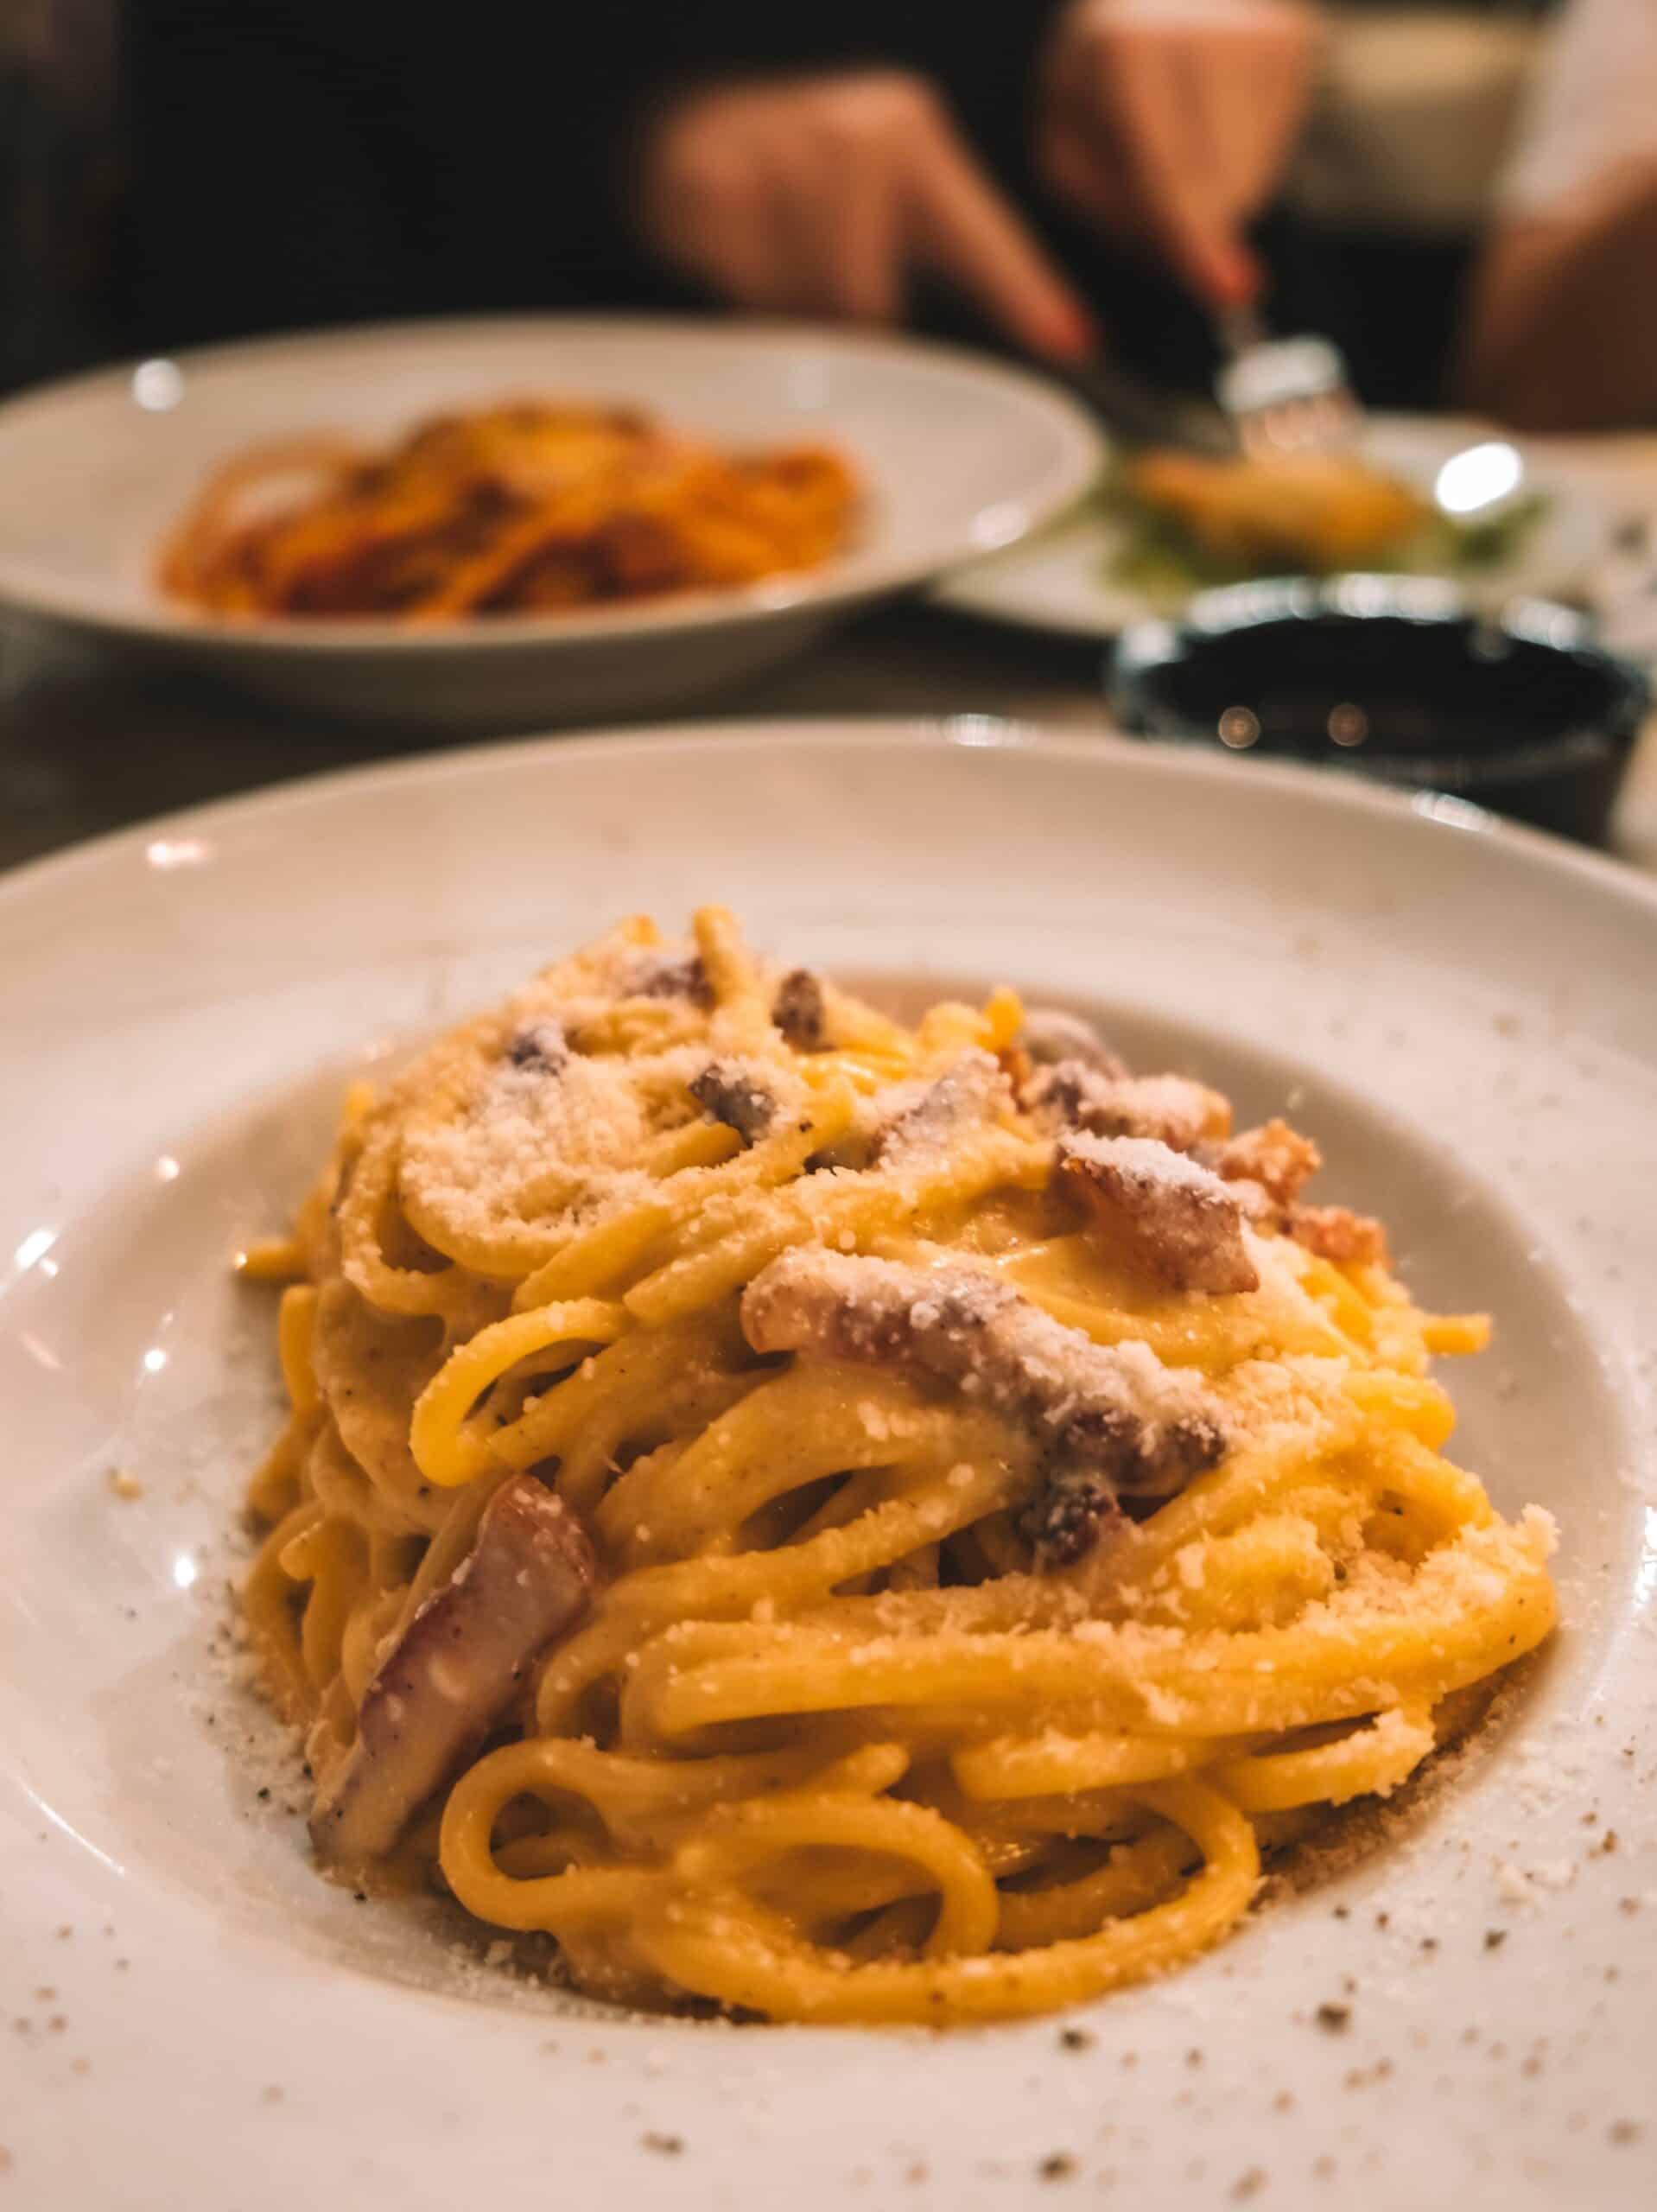 A yummy plate of carbonara from Trattoria Sora Cencia. This is one of the best restaurants in Trastevere Rome. 